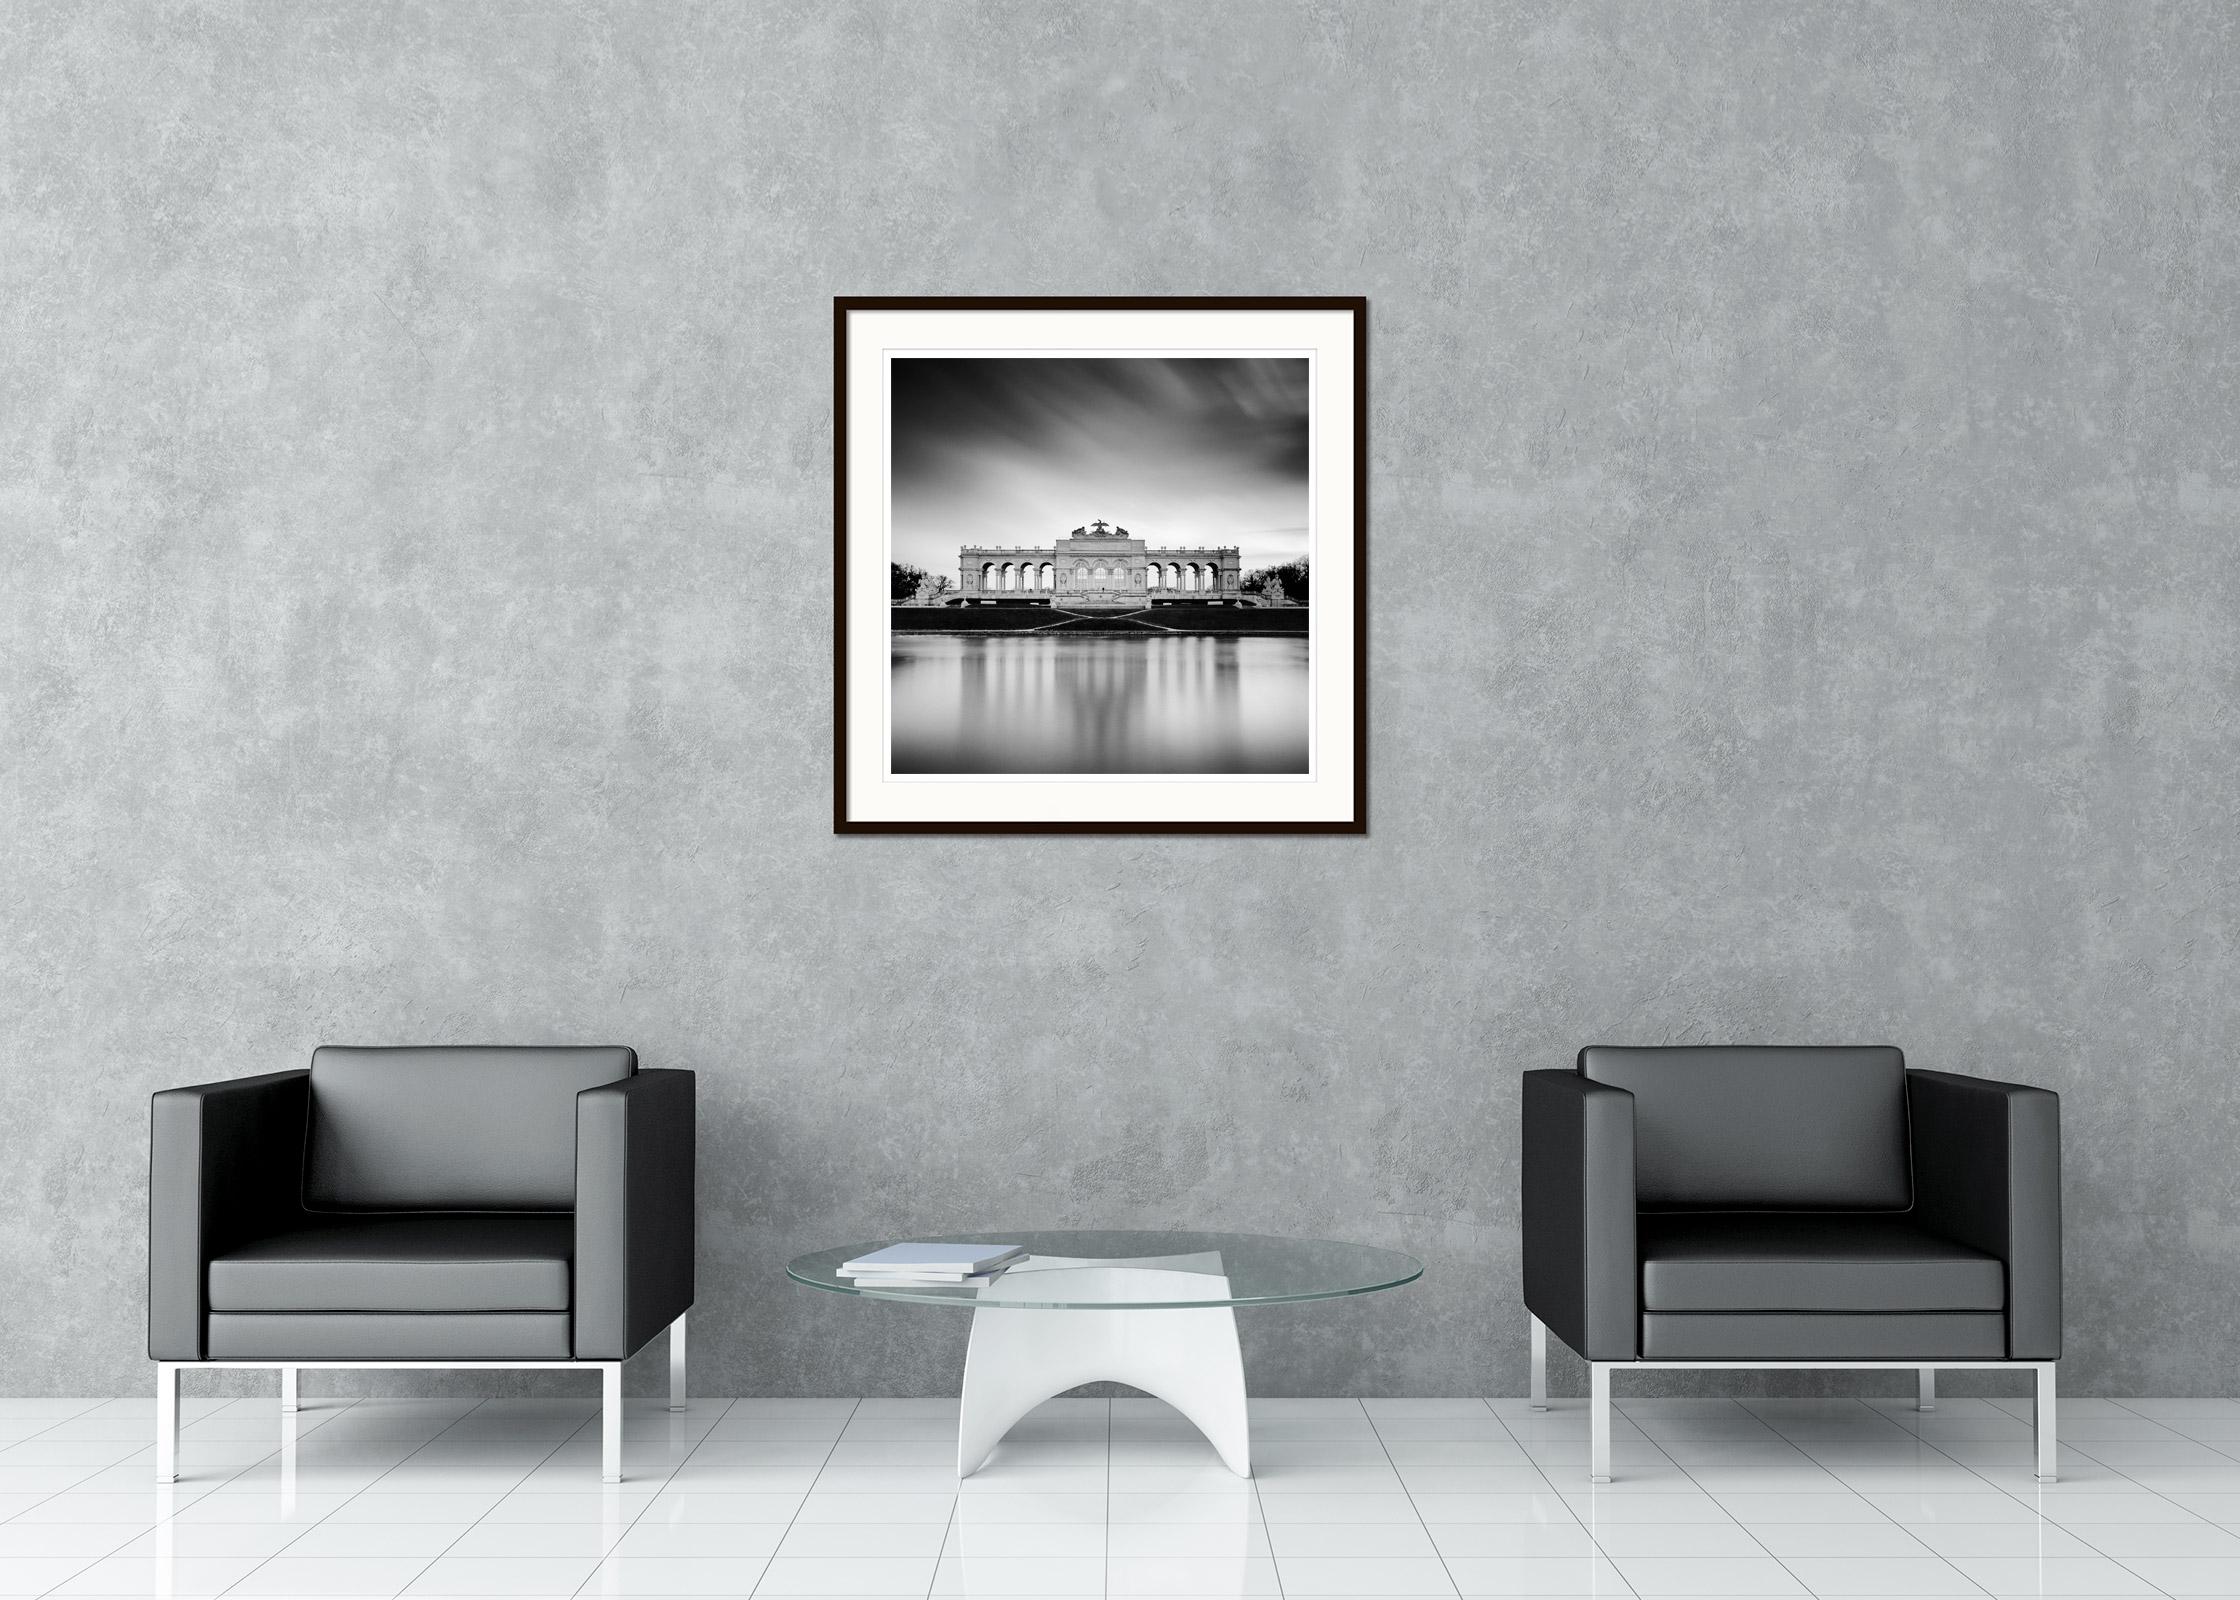 Black and white fine art cityscape - landscape photography print. The Gloriette is a Viennese landmark in the park of Schönbrunn Palace, Vienna, Austria. Archival pigment ink print, edition of 9. Signed, titled, dated and numbered by artist.